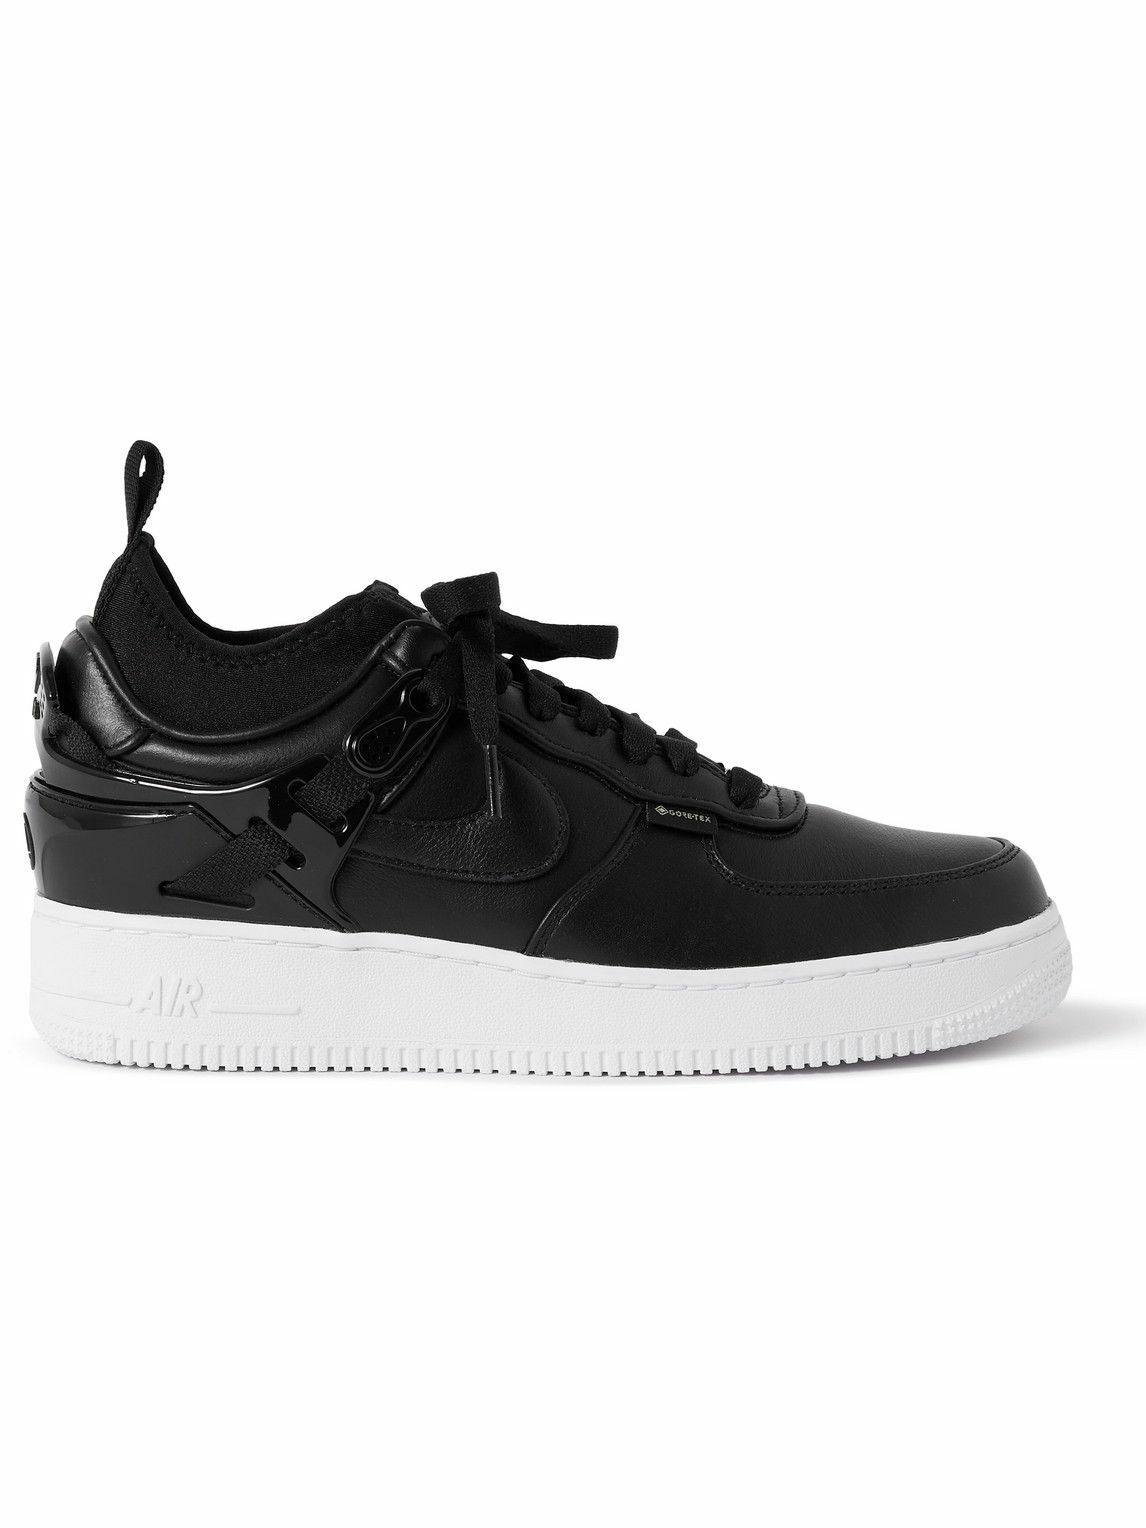 Nike - Undercover Air Force 1 Rubber-Trimmed Leather Sneakers - Black Nike